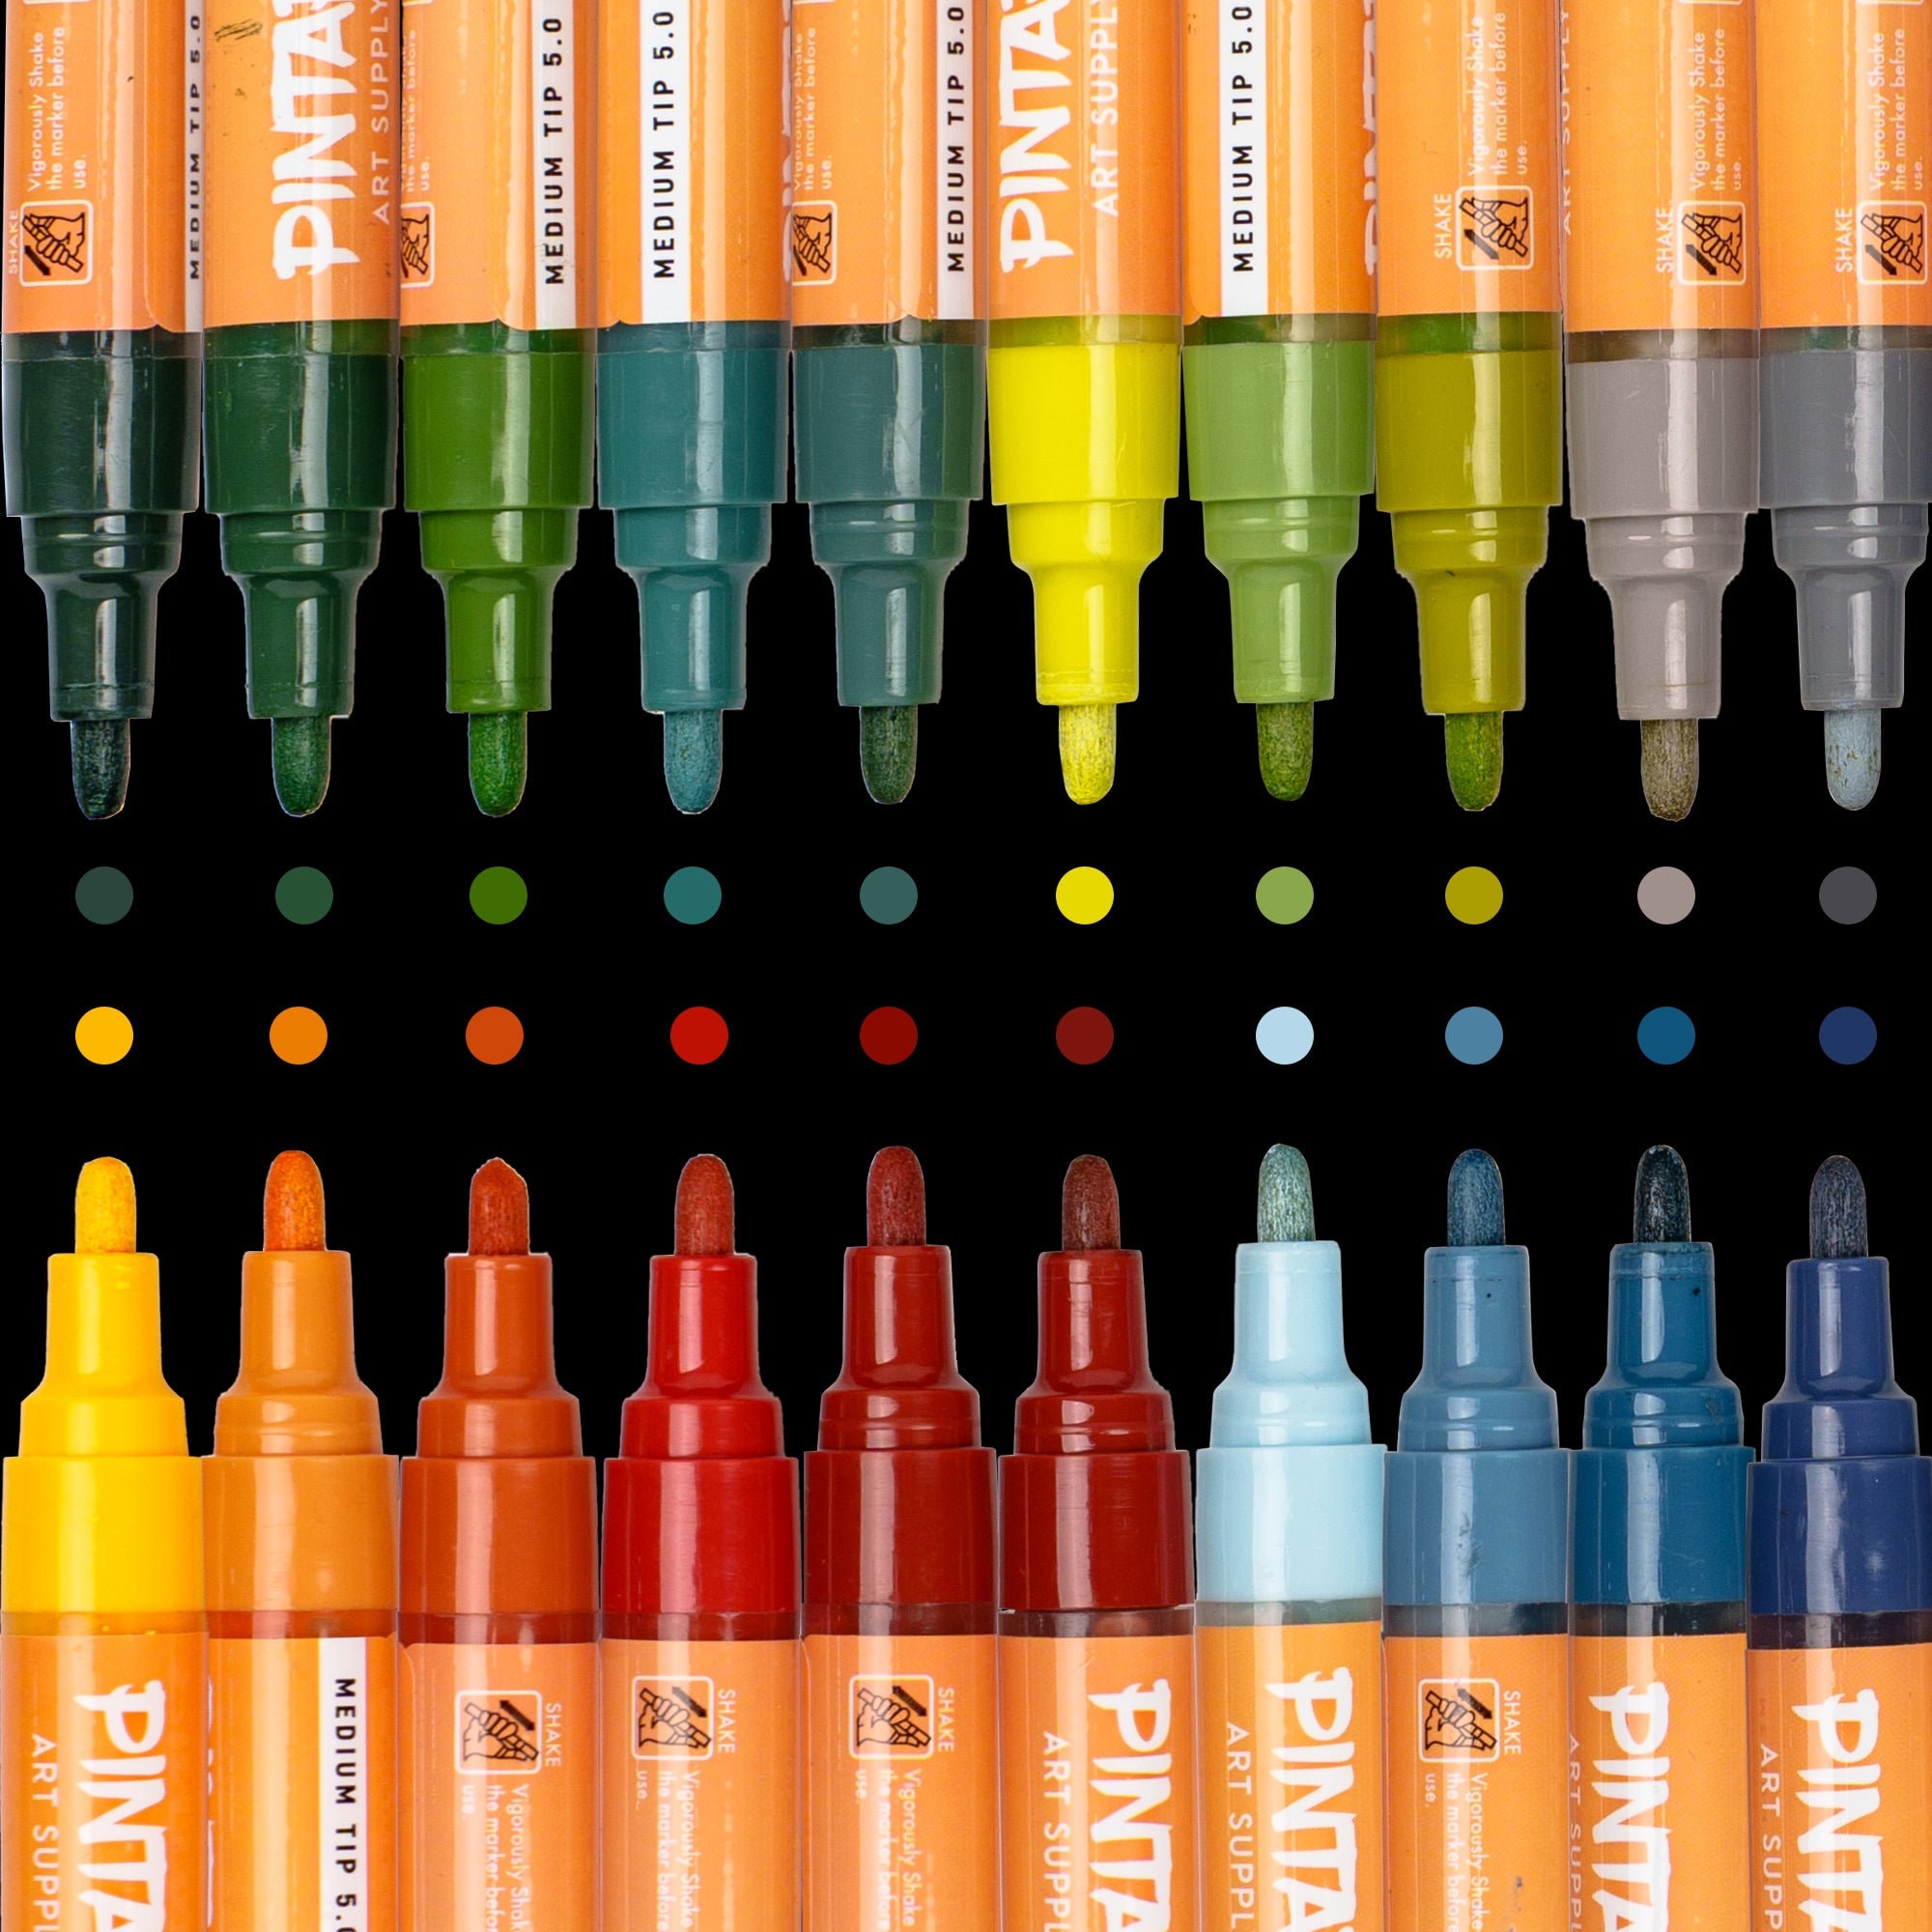 PINTAR Pastel Acrylic Paint Pens/Markers for Rock Painting, Wood